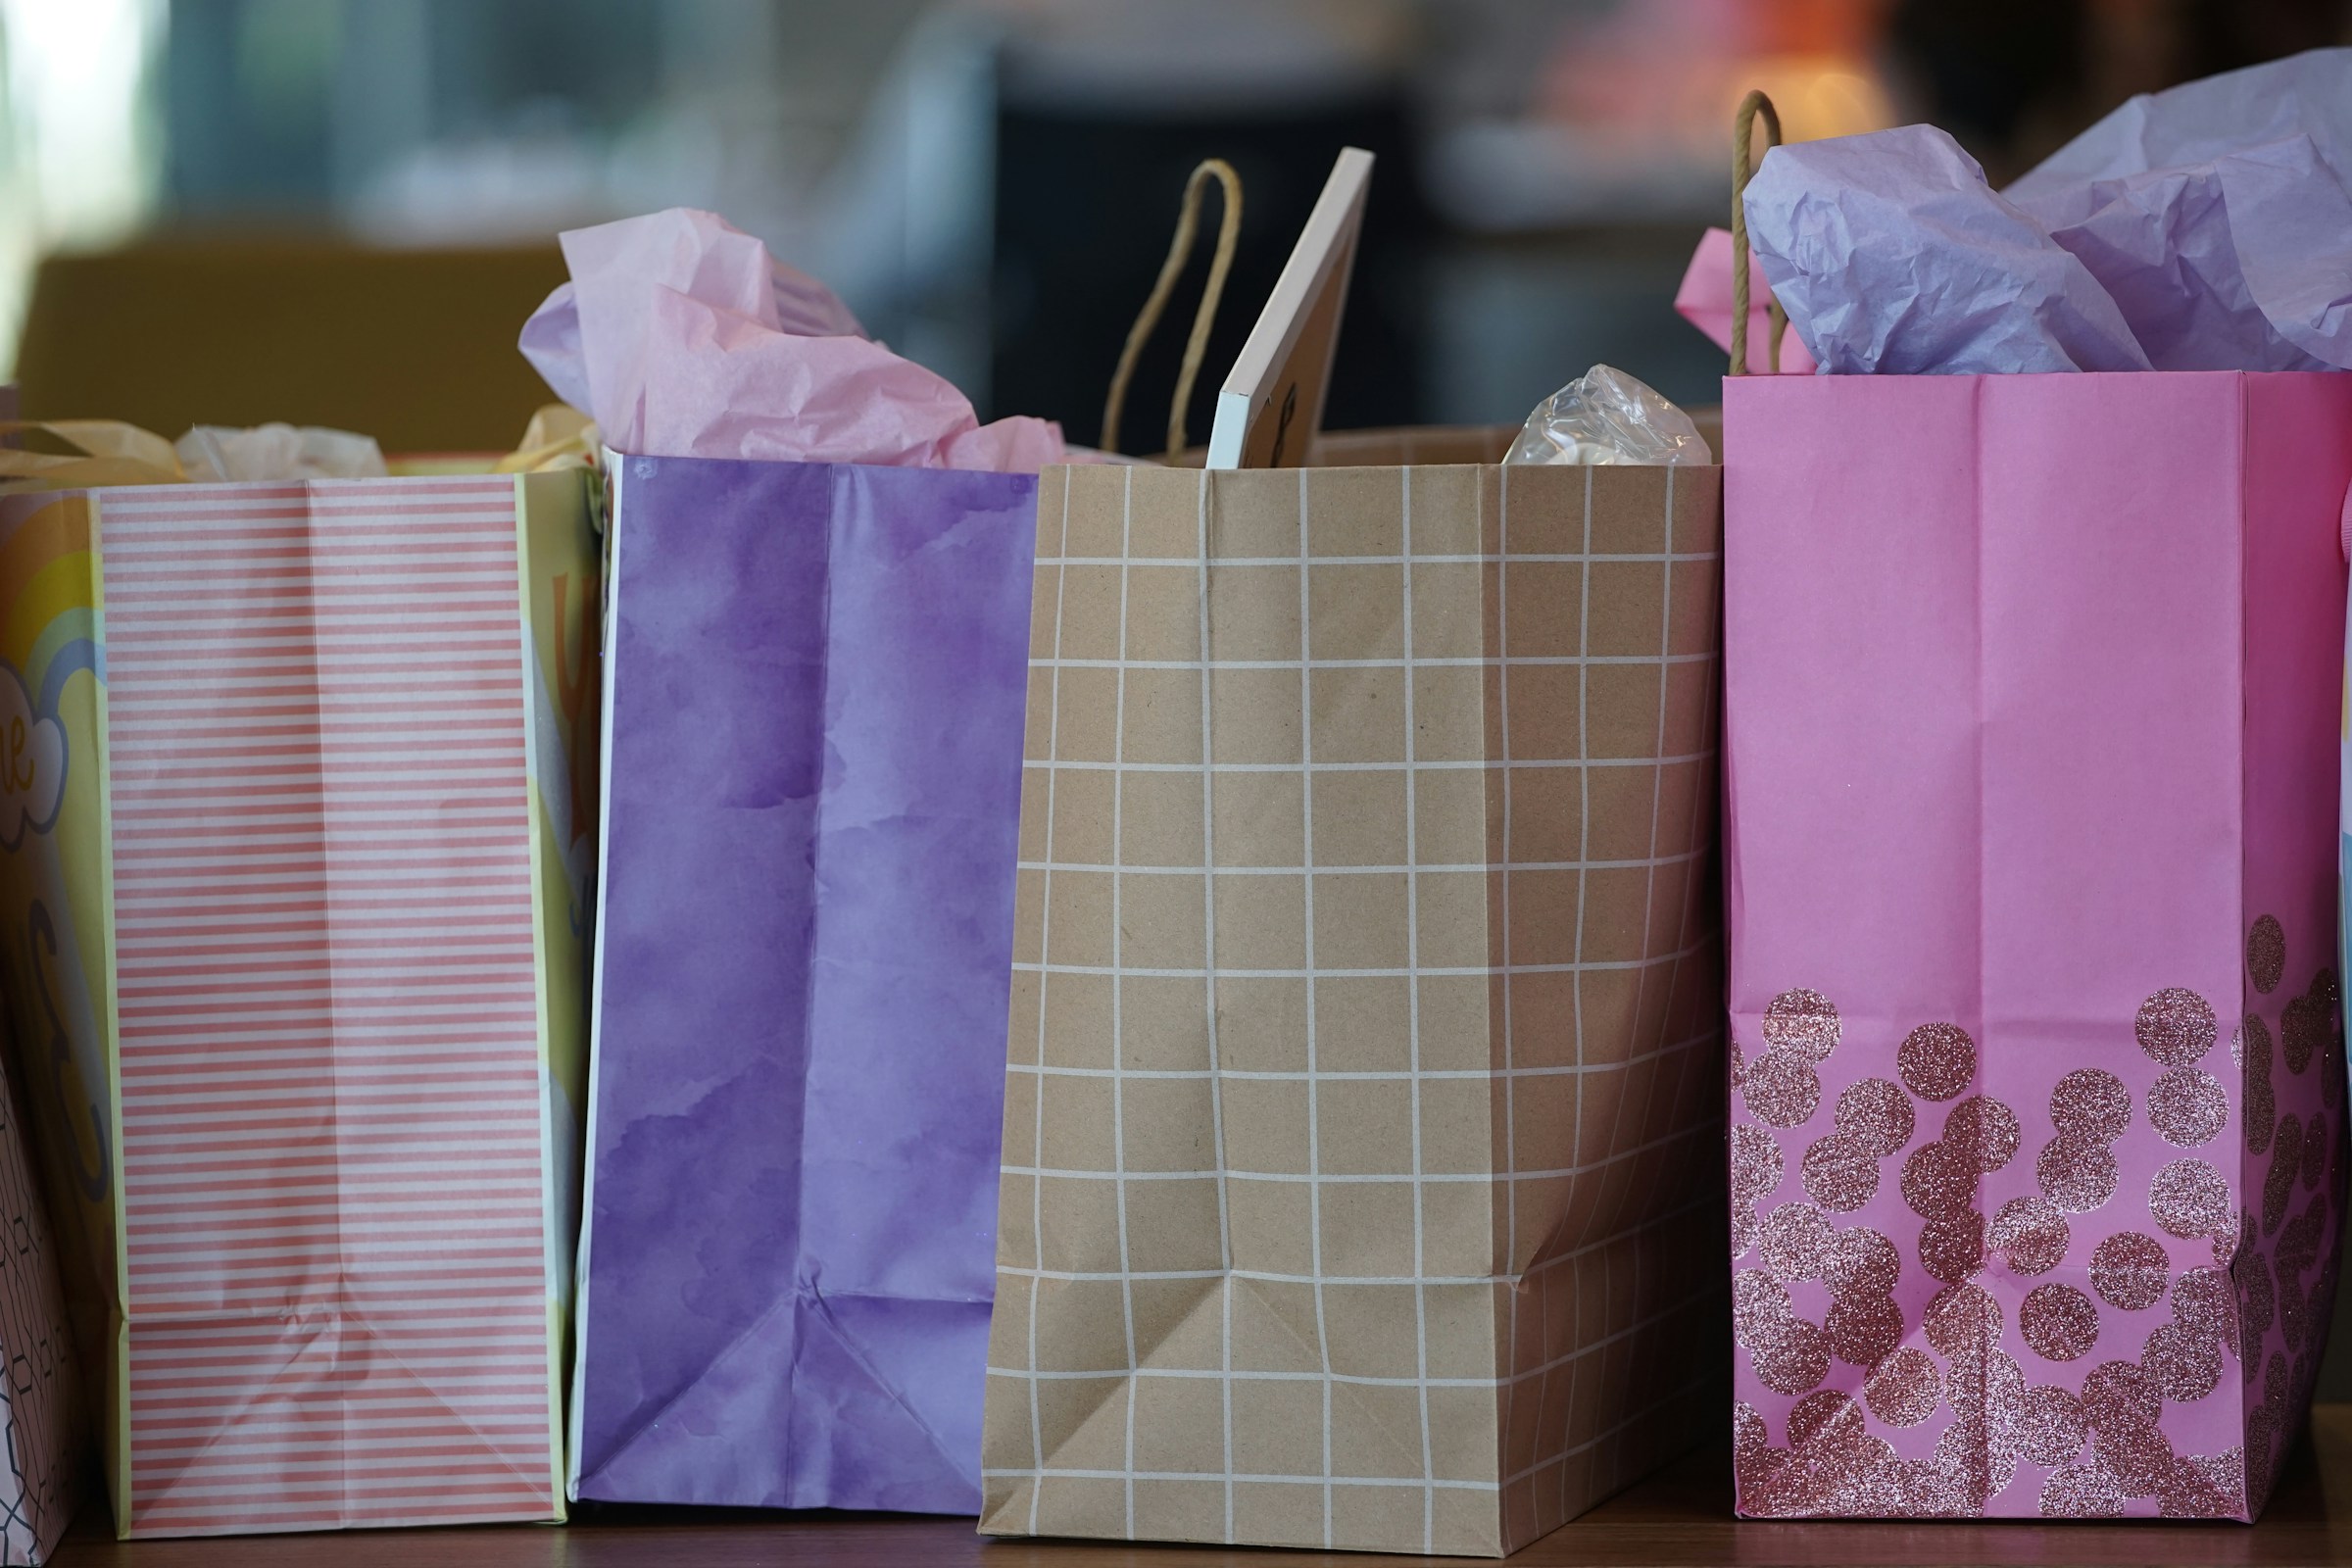 Colored gift bags | Source: Unsplash